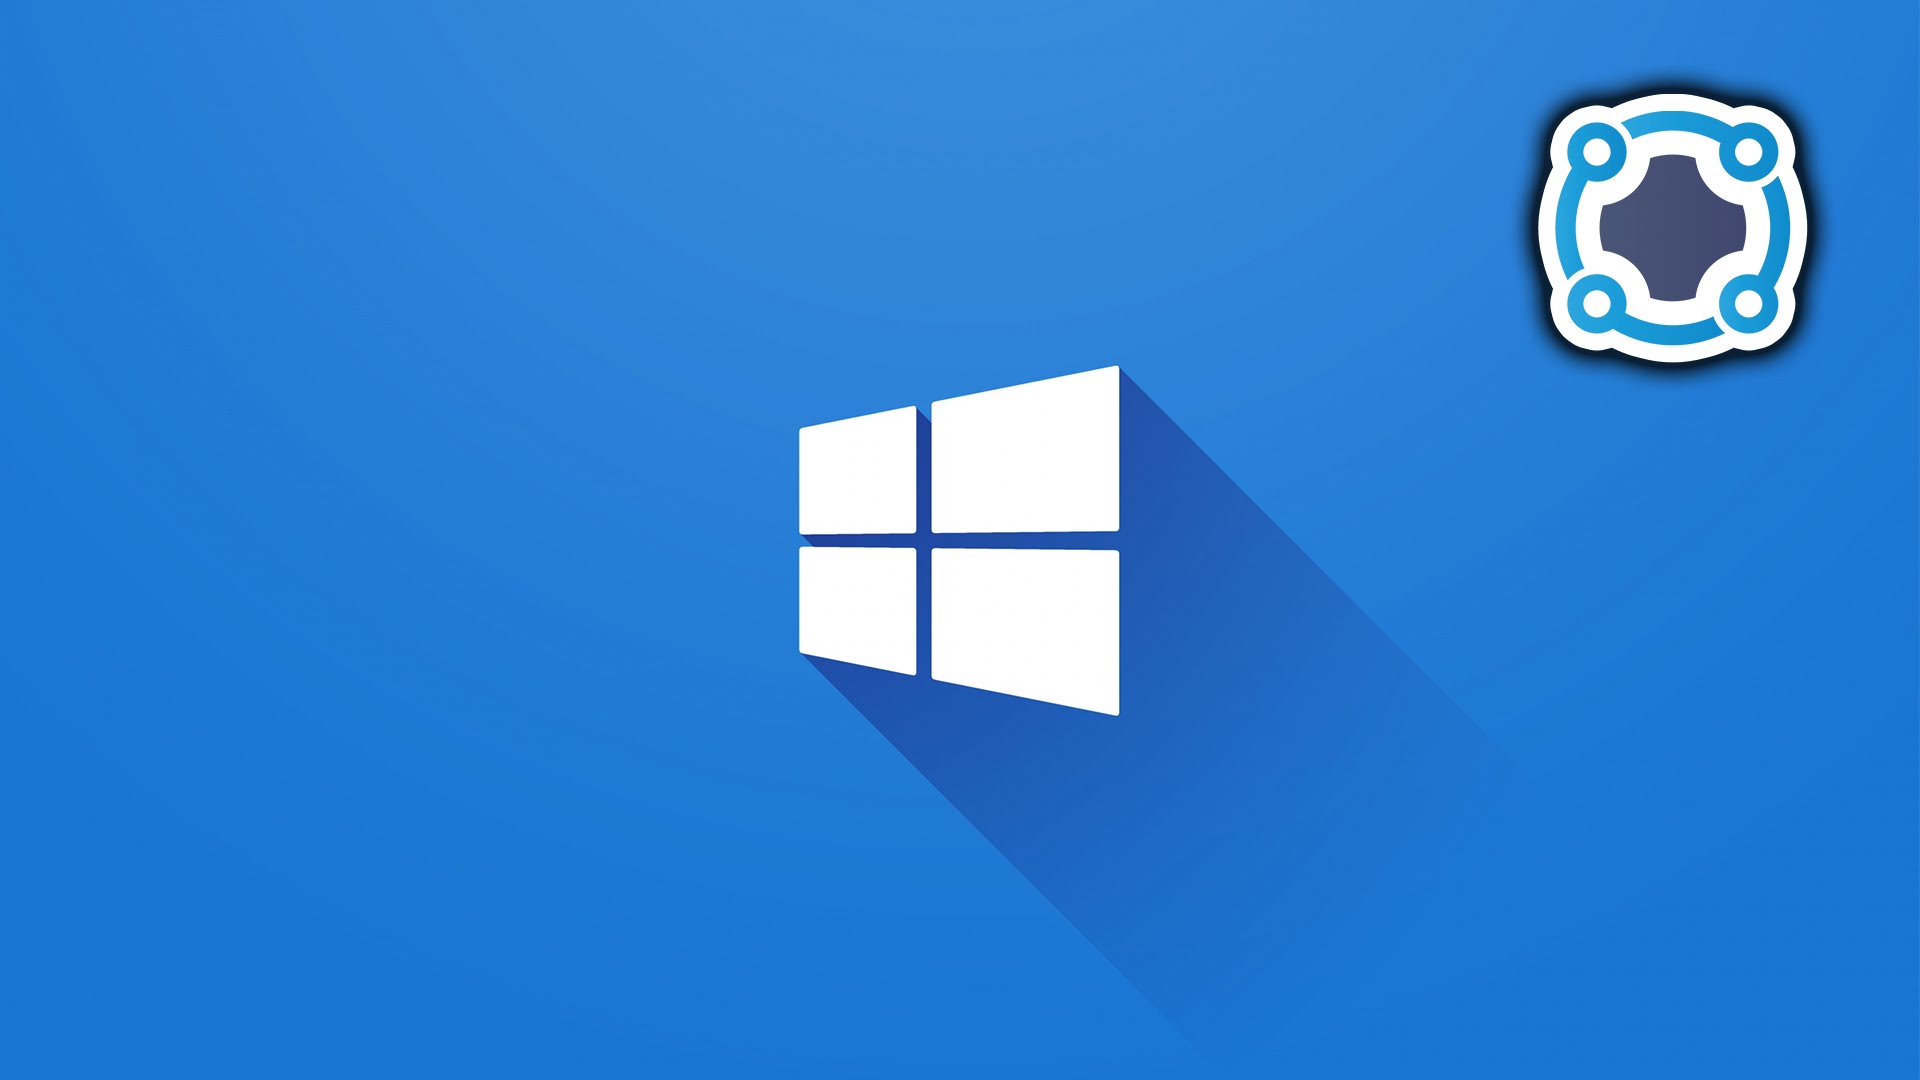 Windows 10 Will Be Supported For 10 Years